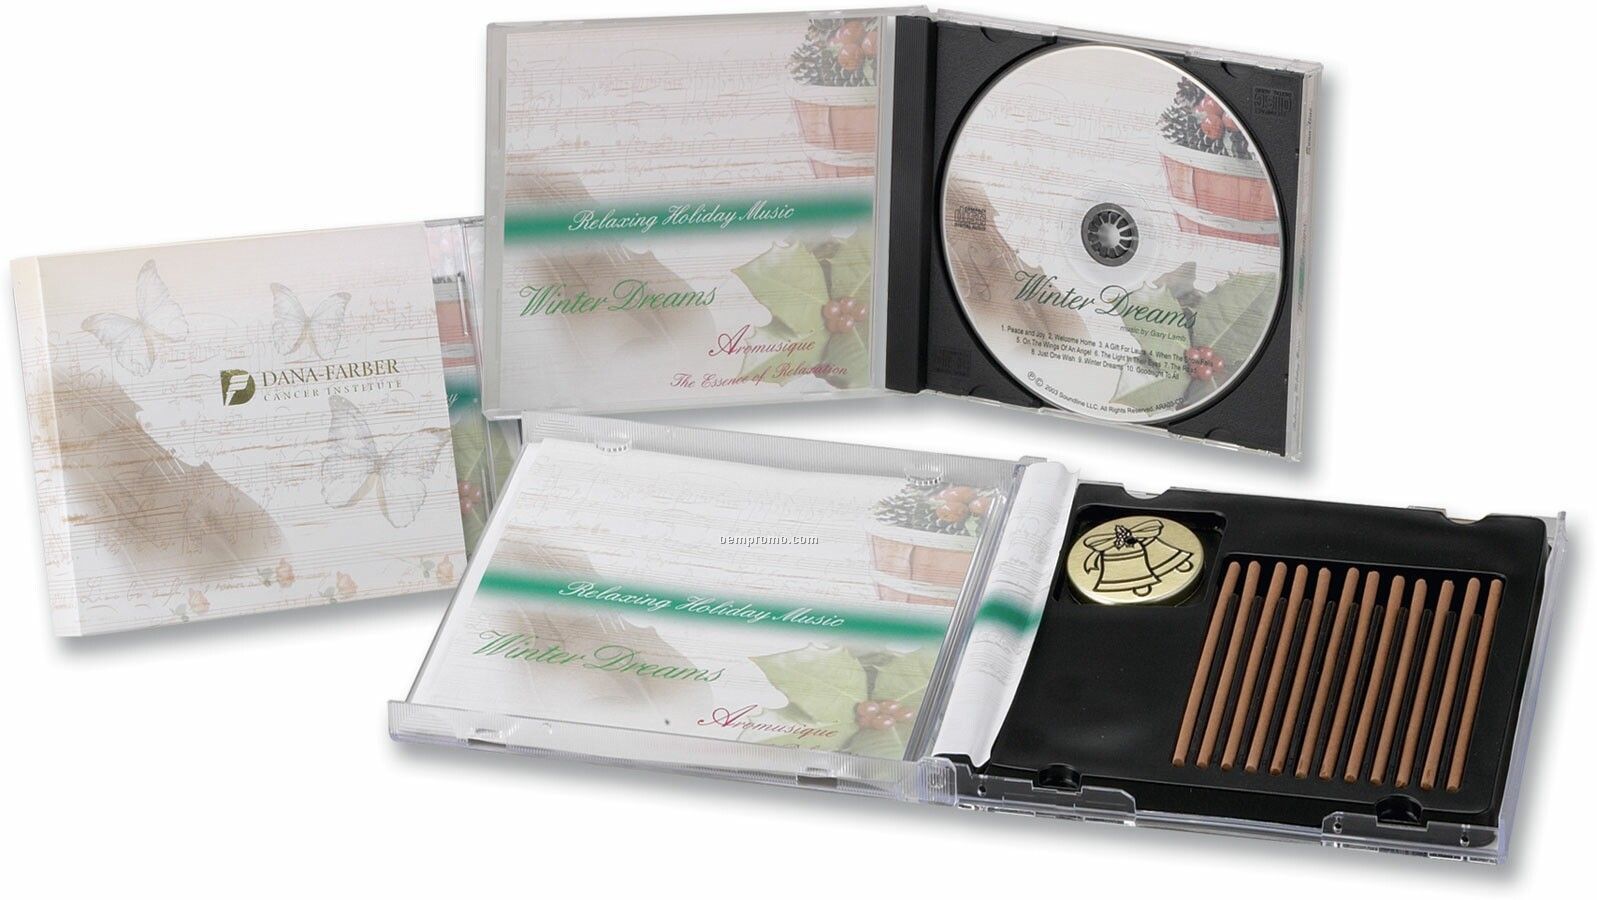 Holiday Spice & Holiday Music CD With Packaged Spice Scent Incense